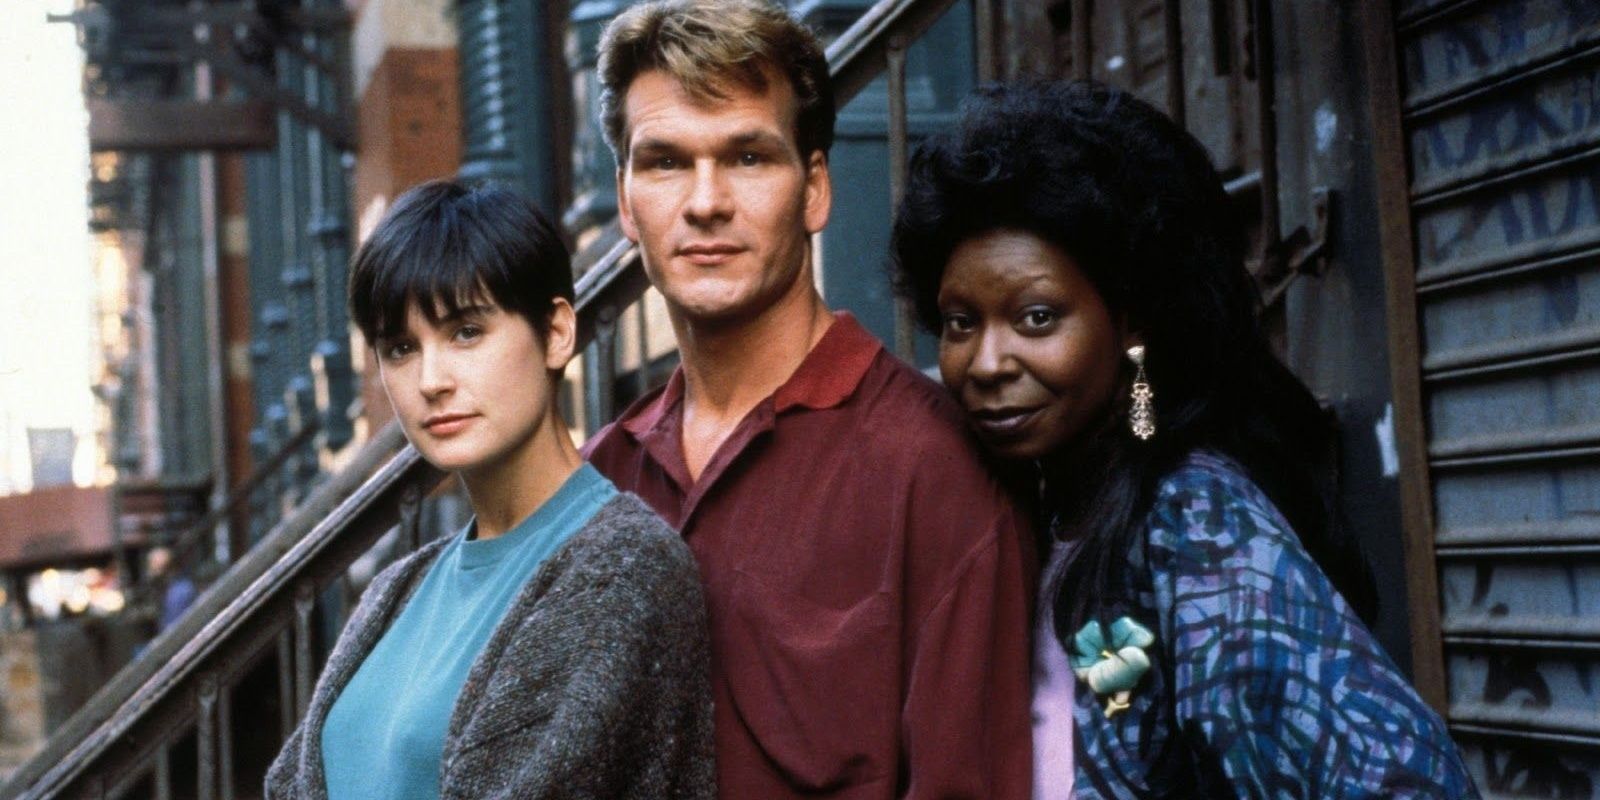 Demi Moore, Patrick Swayze, and Whoopi Goldberg on a promo image for Ghost.